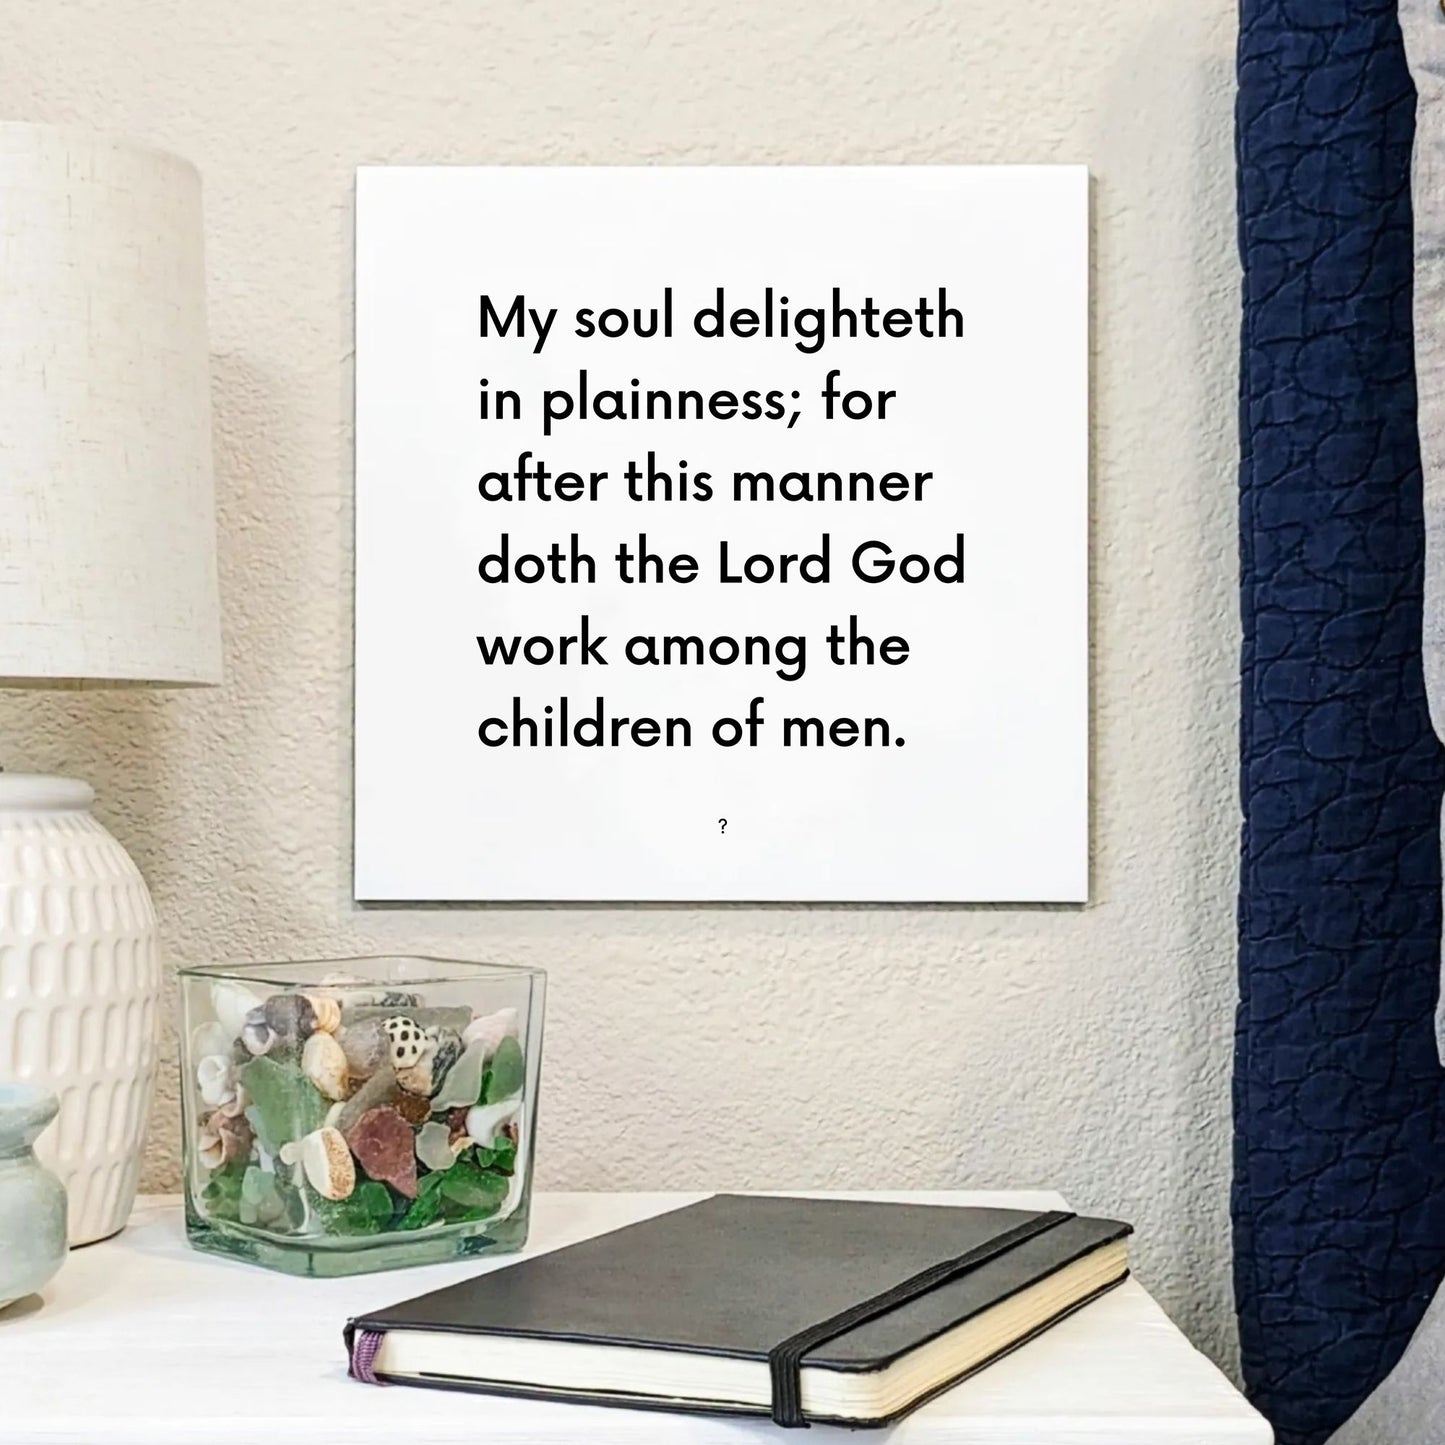 Bedside mouting of the scripture tile for 2 Nephi 31:3 - "My soul delighteth in plainness"